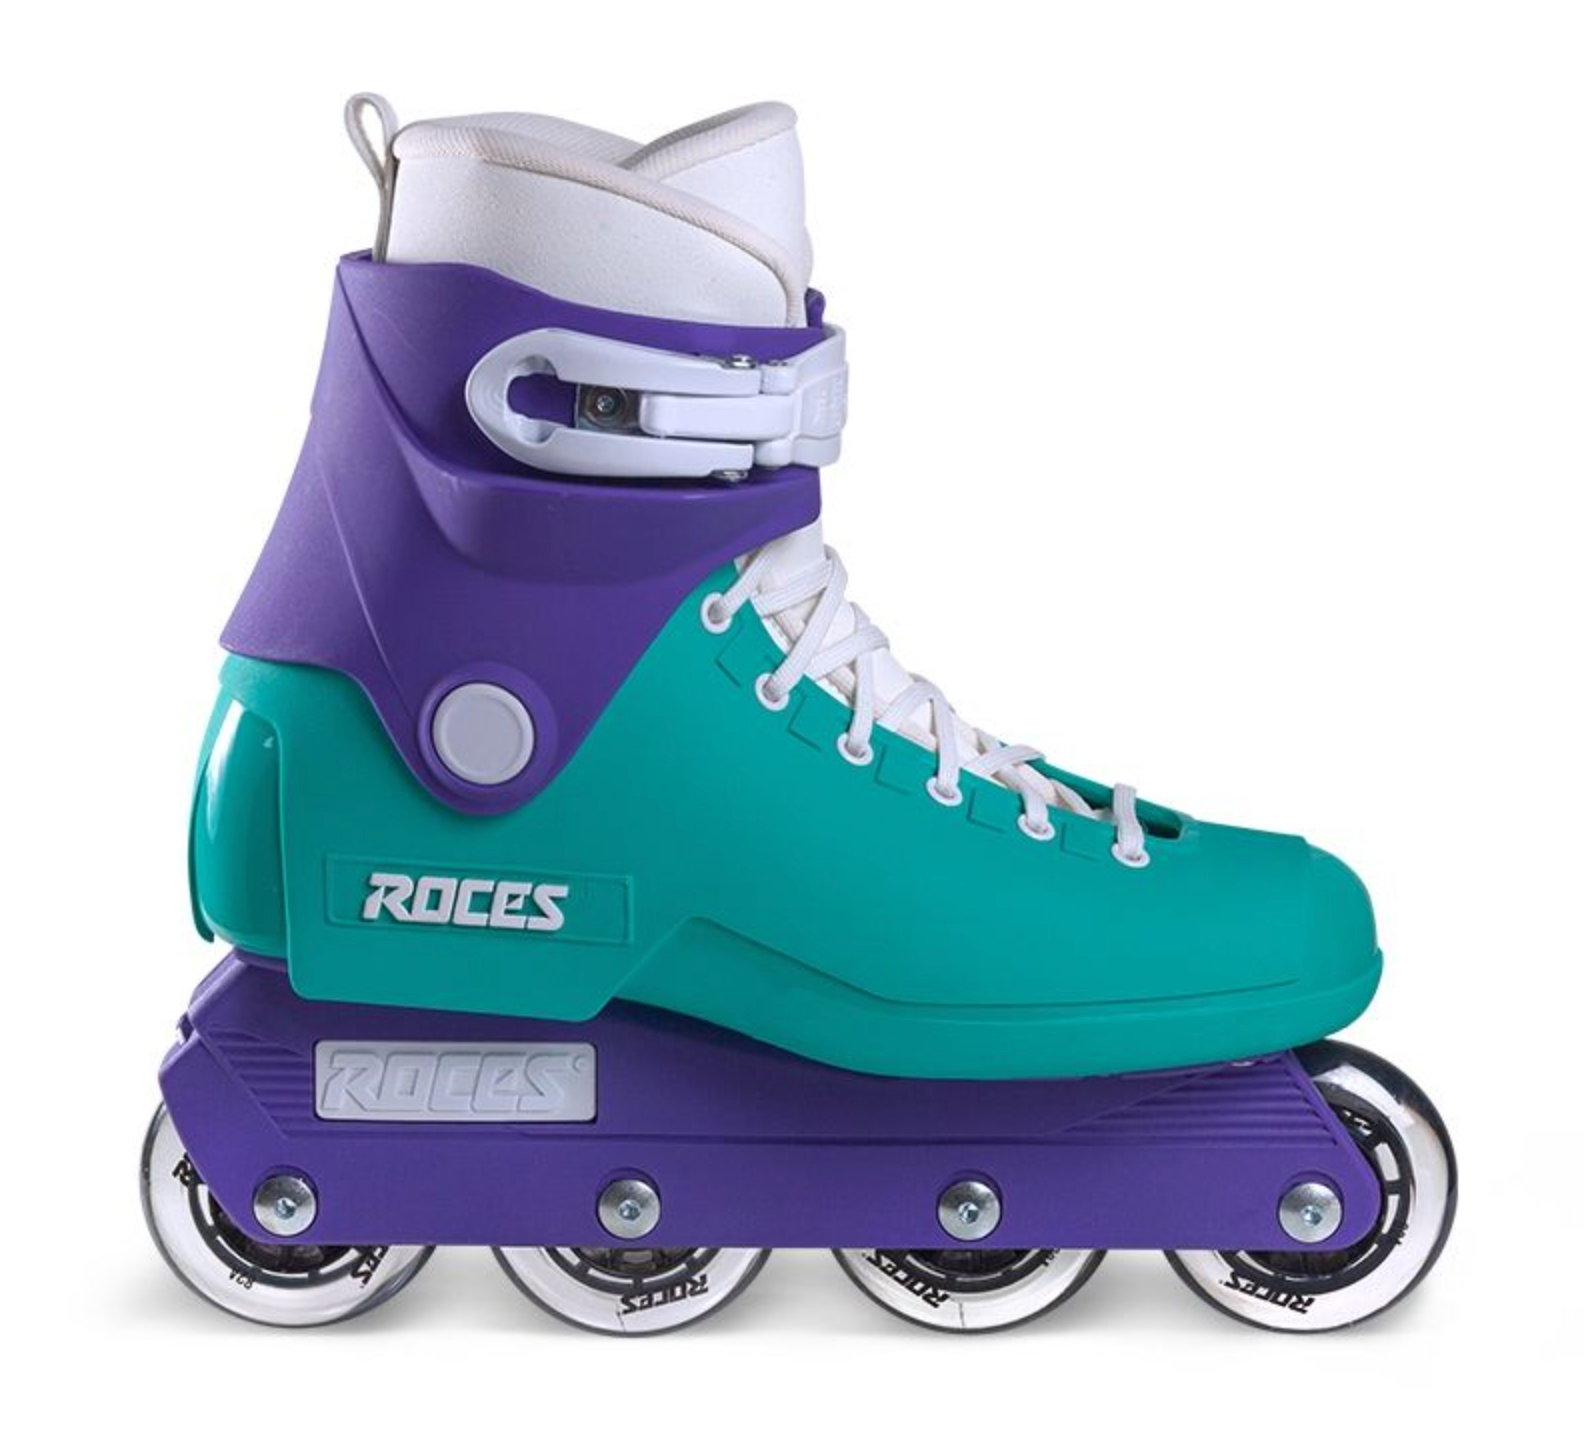 Roces 1992 Inline Skates, Rollerblades, Intuition Skate Shop, Where to Buy Rollerblades, Skate Shops Near Me, Roces 1992 Teal and Purple